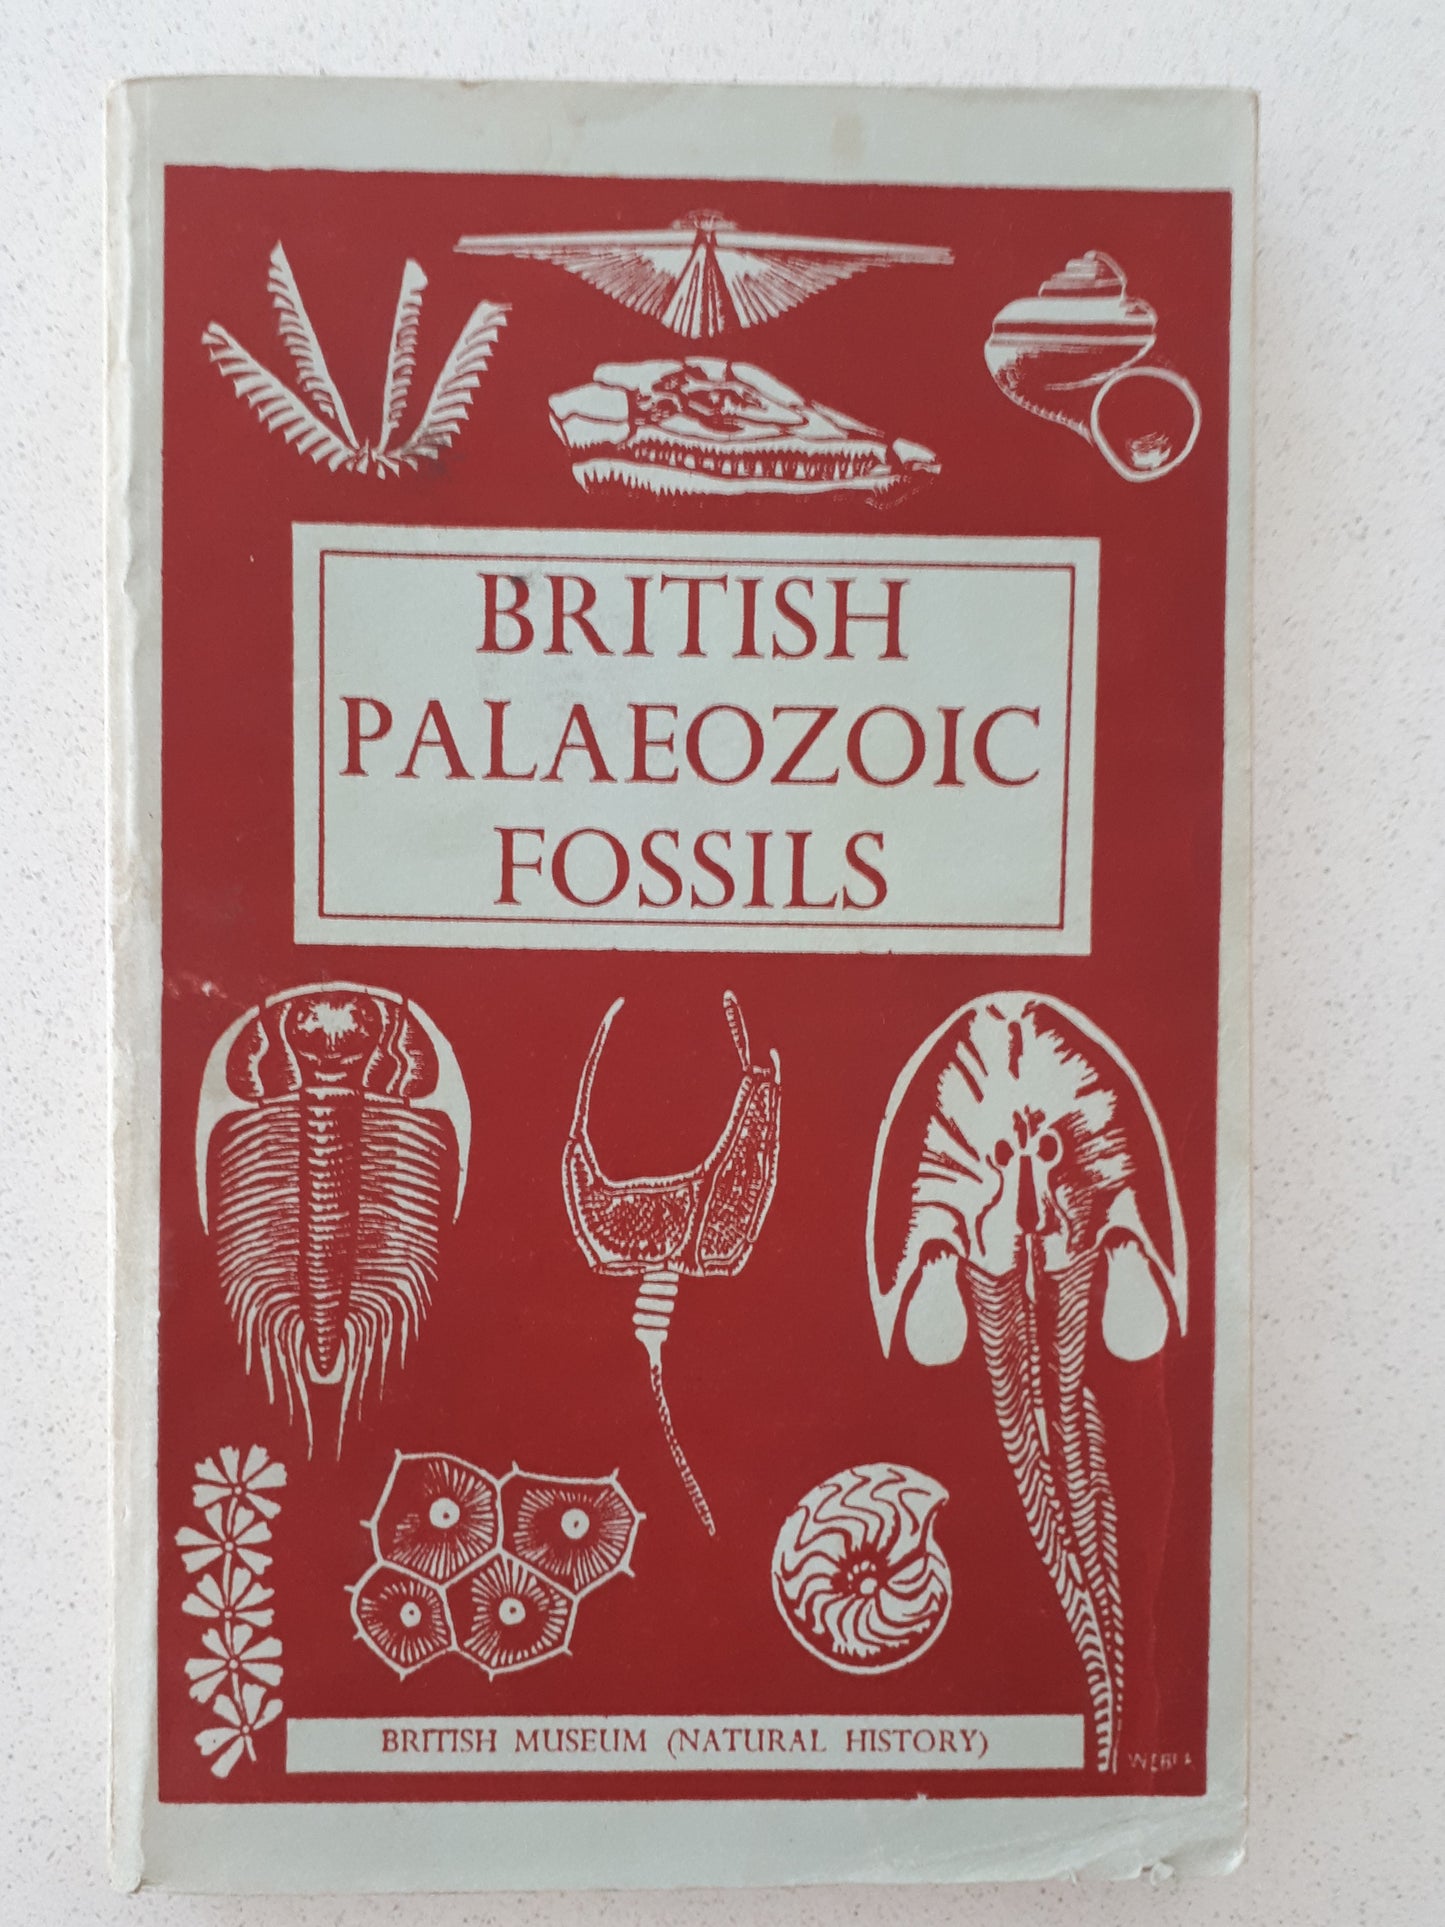 British Palaeozoic Fossils by The Natural History Museum